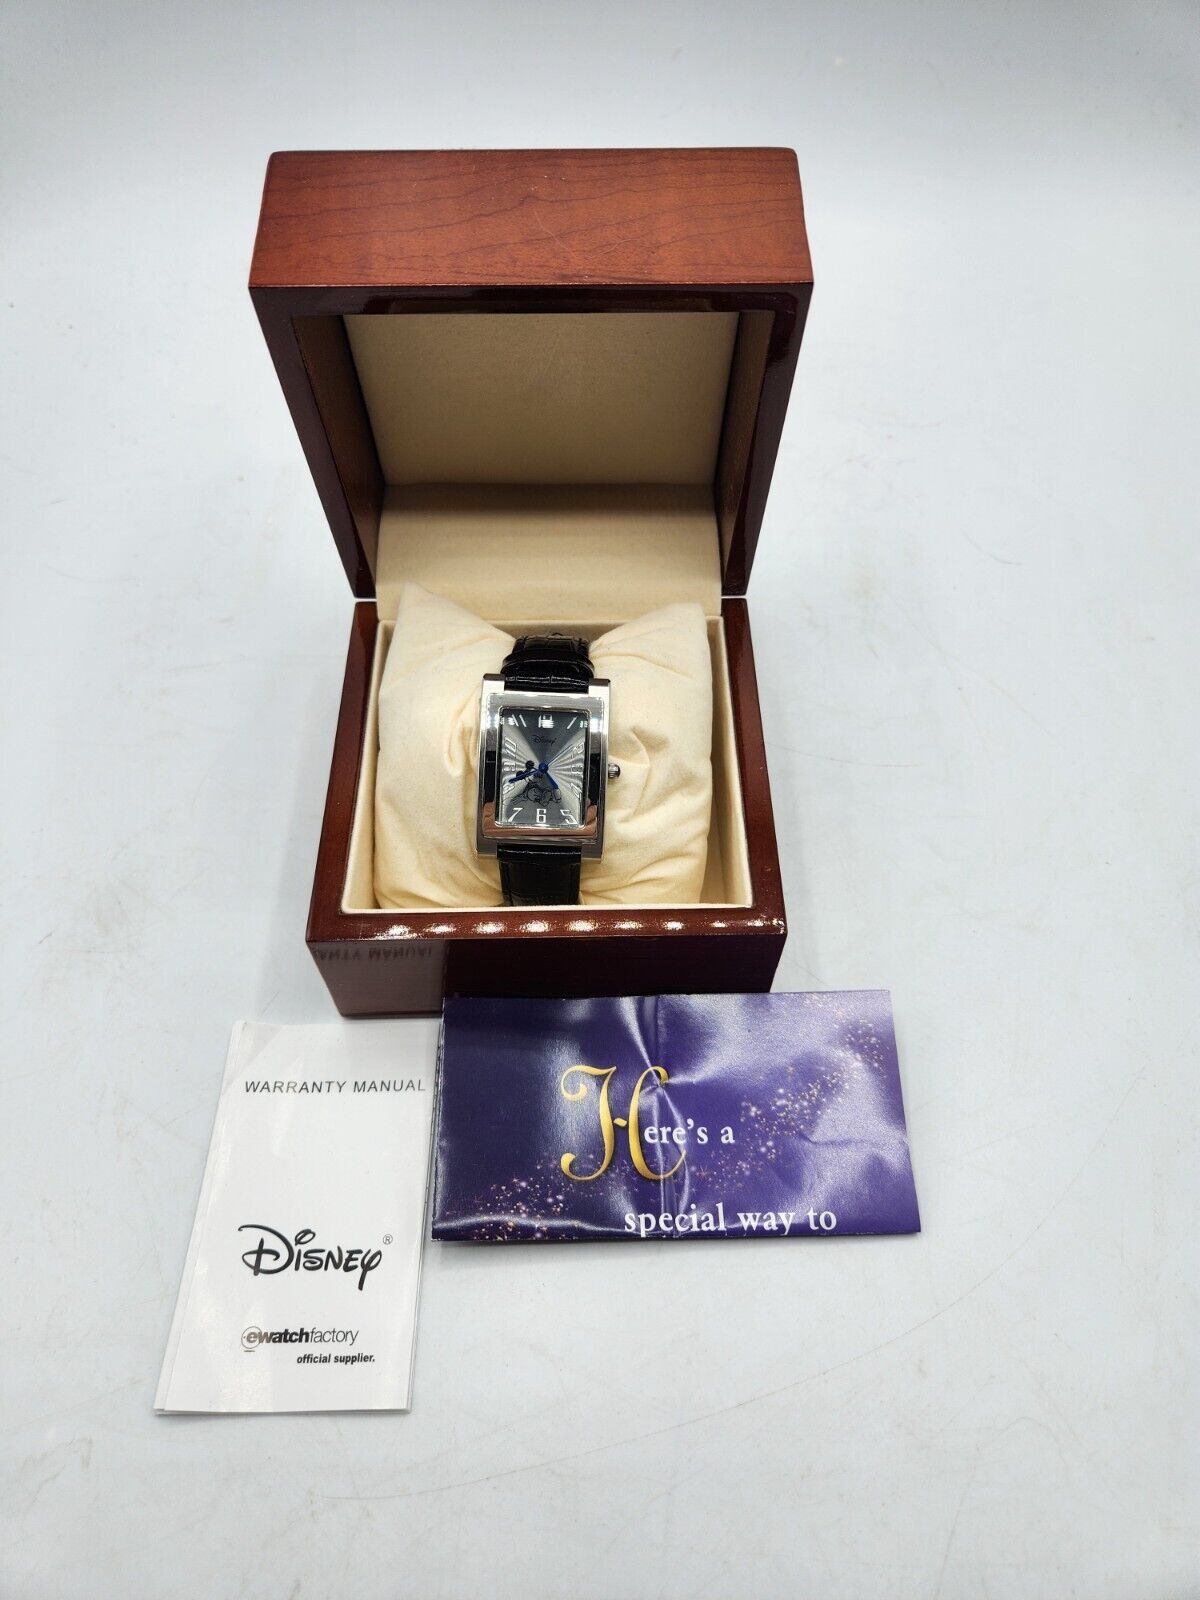 Disney Mickey Mouse 2005 Shareholders Limited Edition Watch - Wood Box